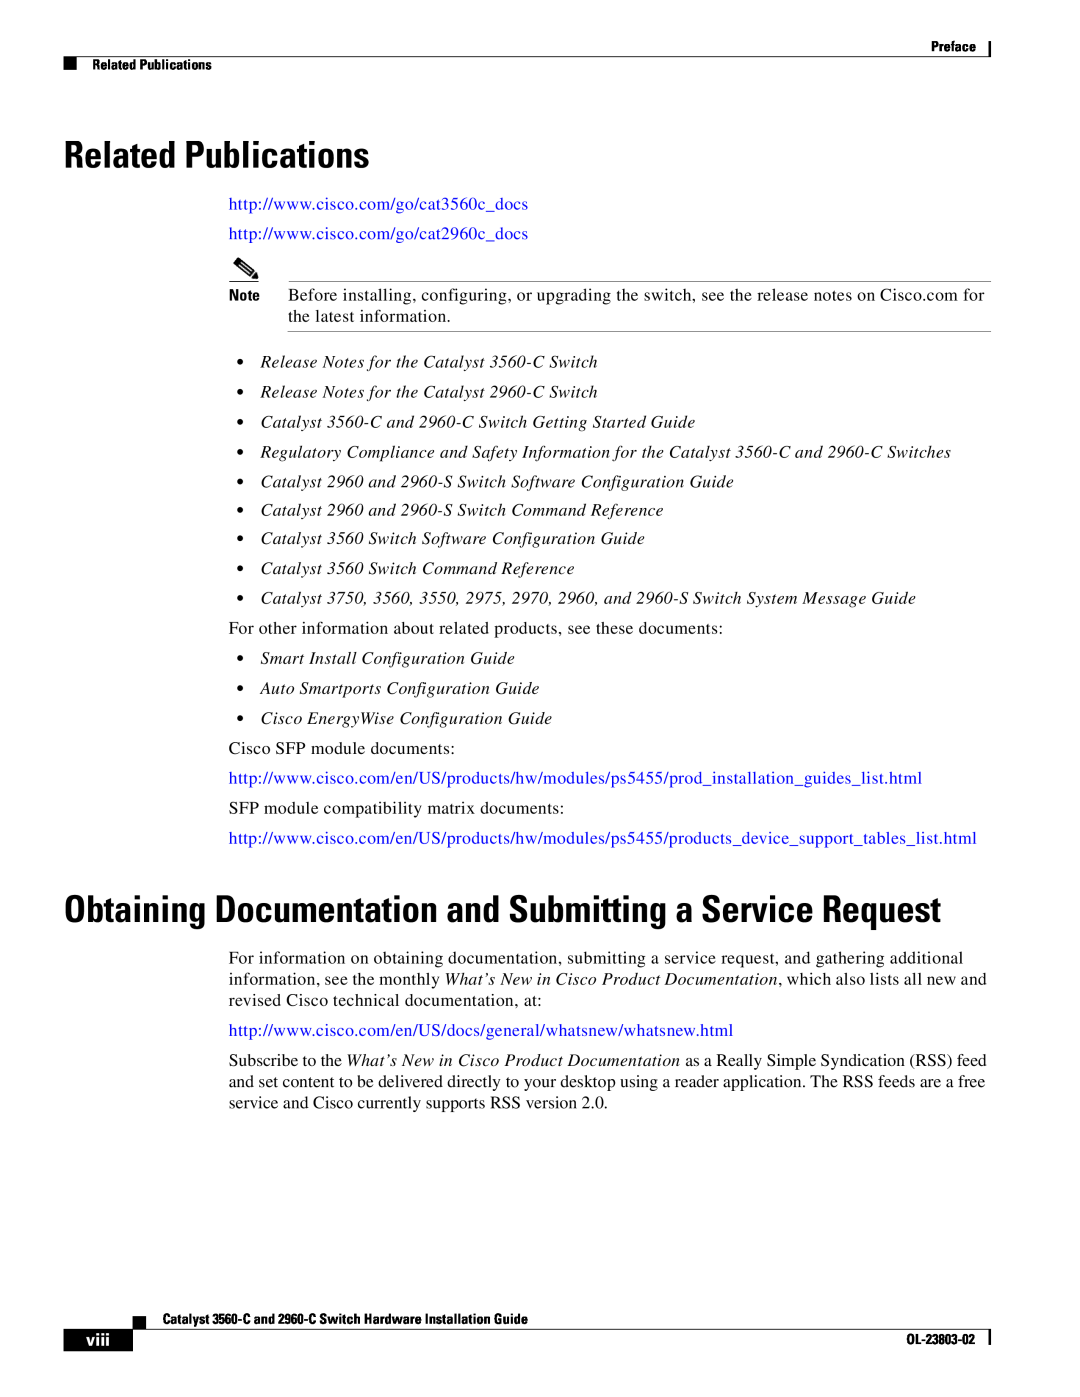 Cisco Systems 3560-C manual Related Publications, viii, Obtaining Documentation and Submitting a Service Request 